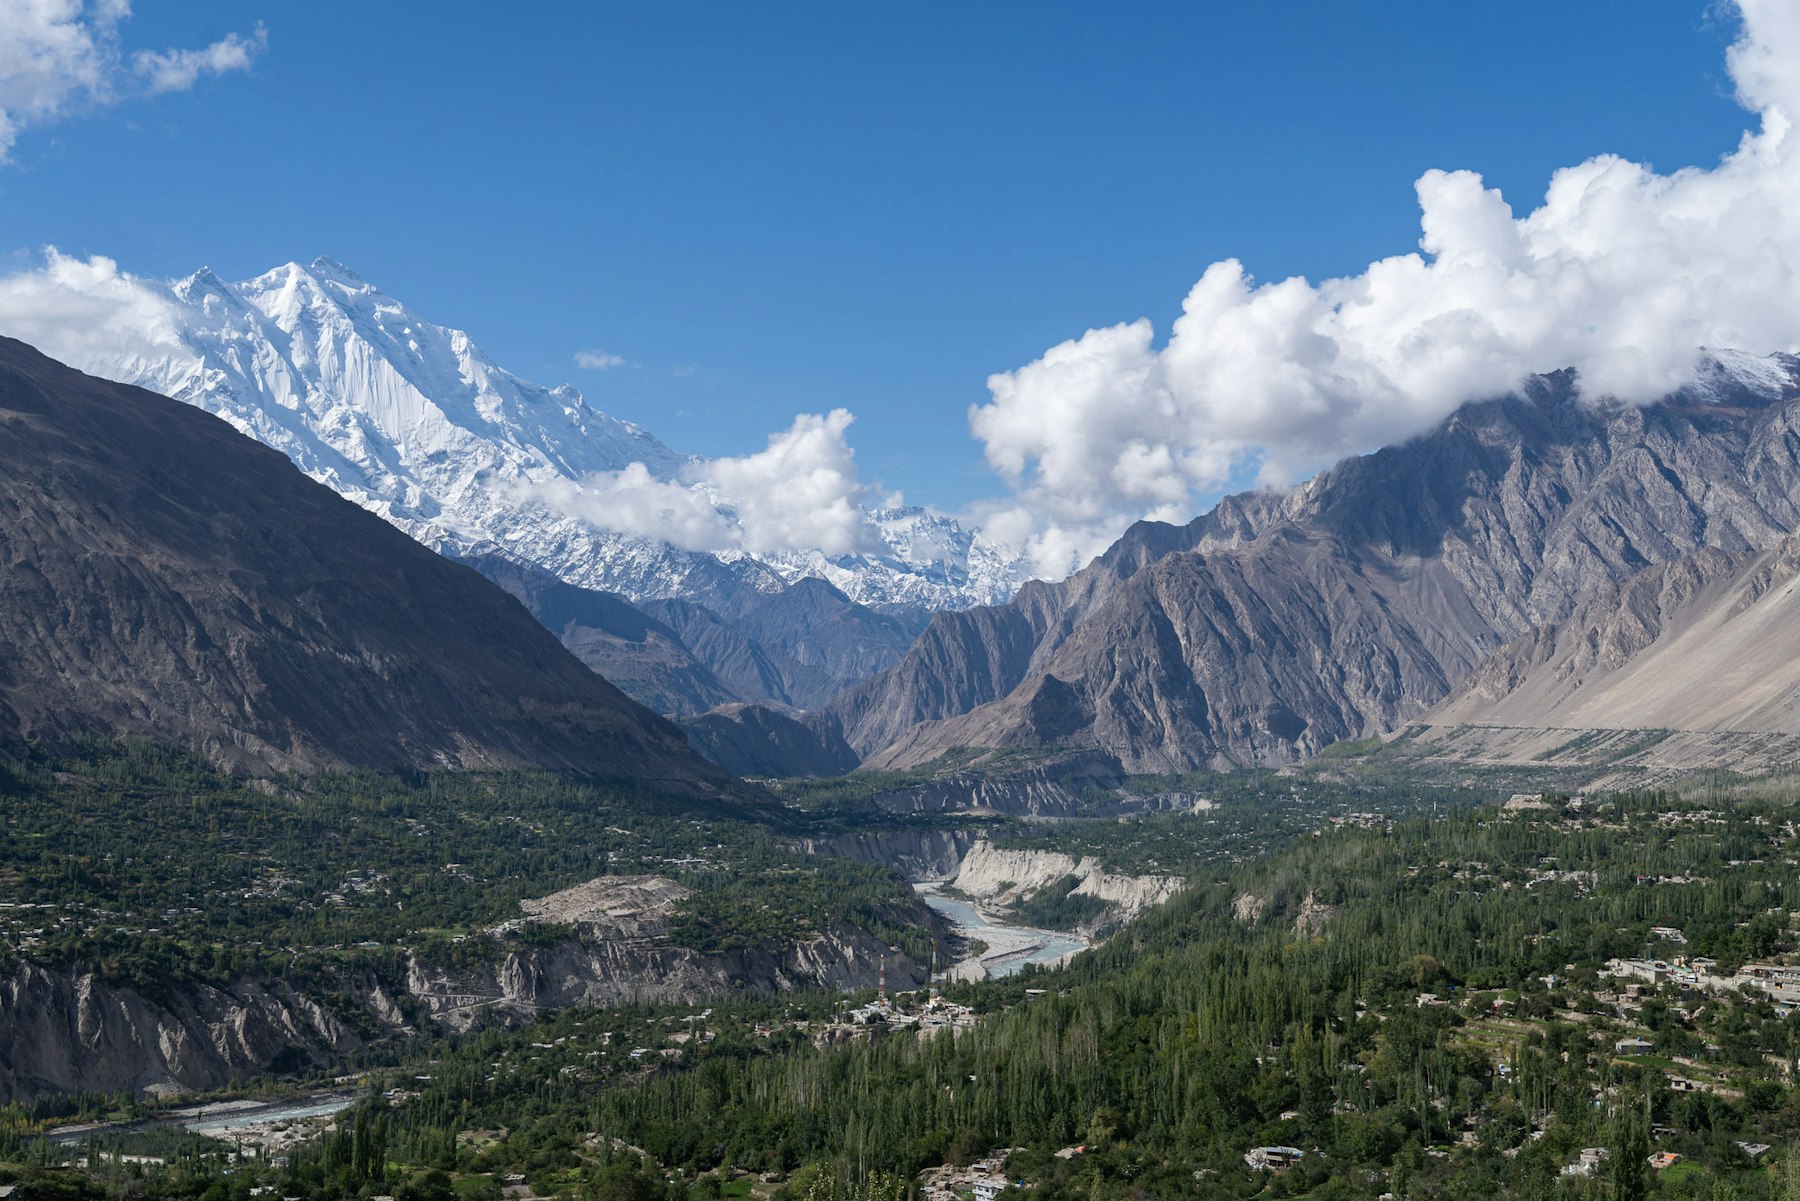 The highest irrigation channel is clearly visible on either side of the Hunza valley (and in the image below) allowing trees and crops to grow below it